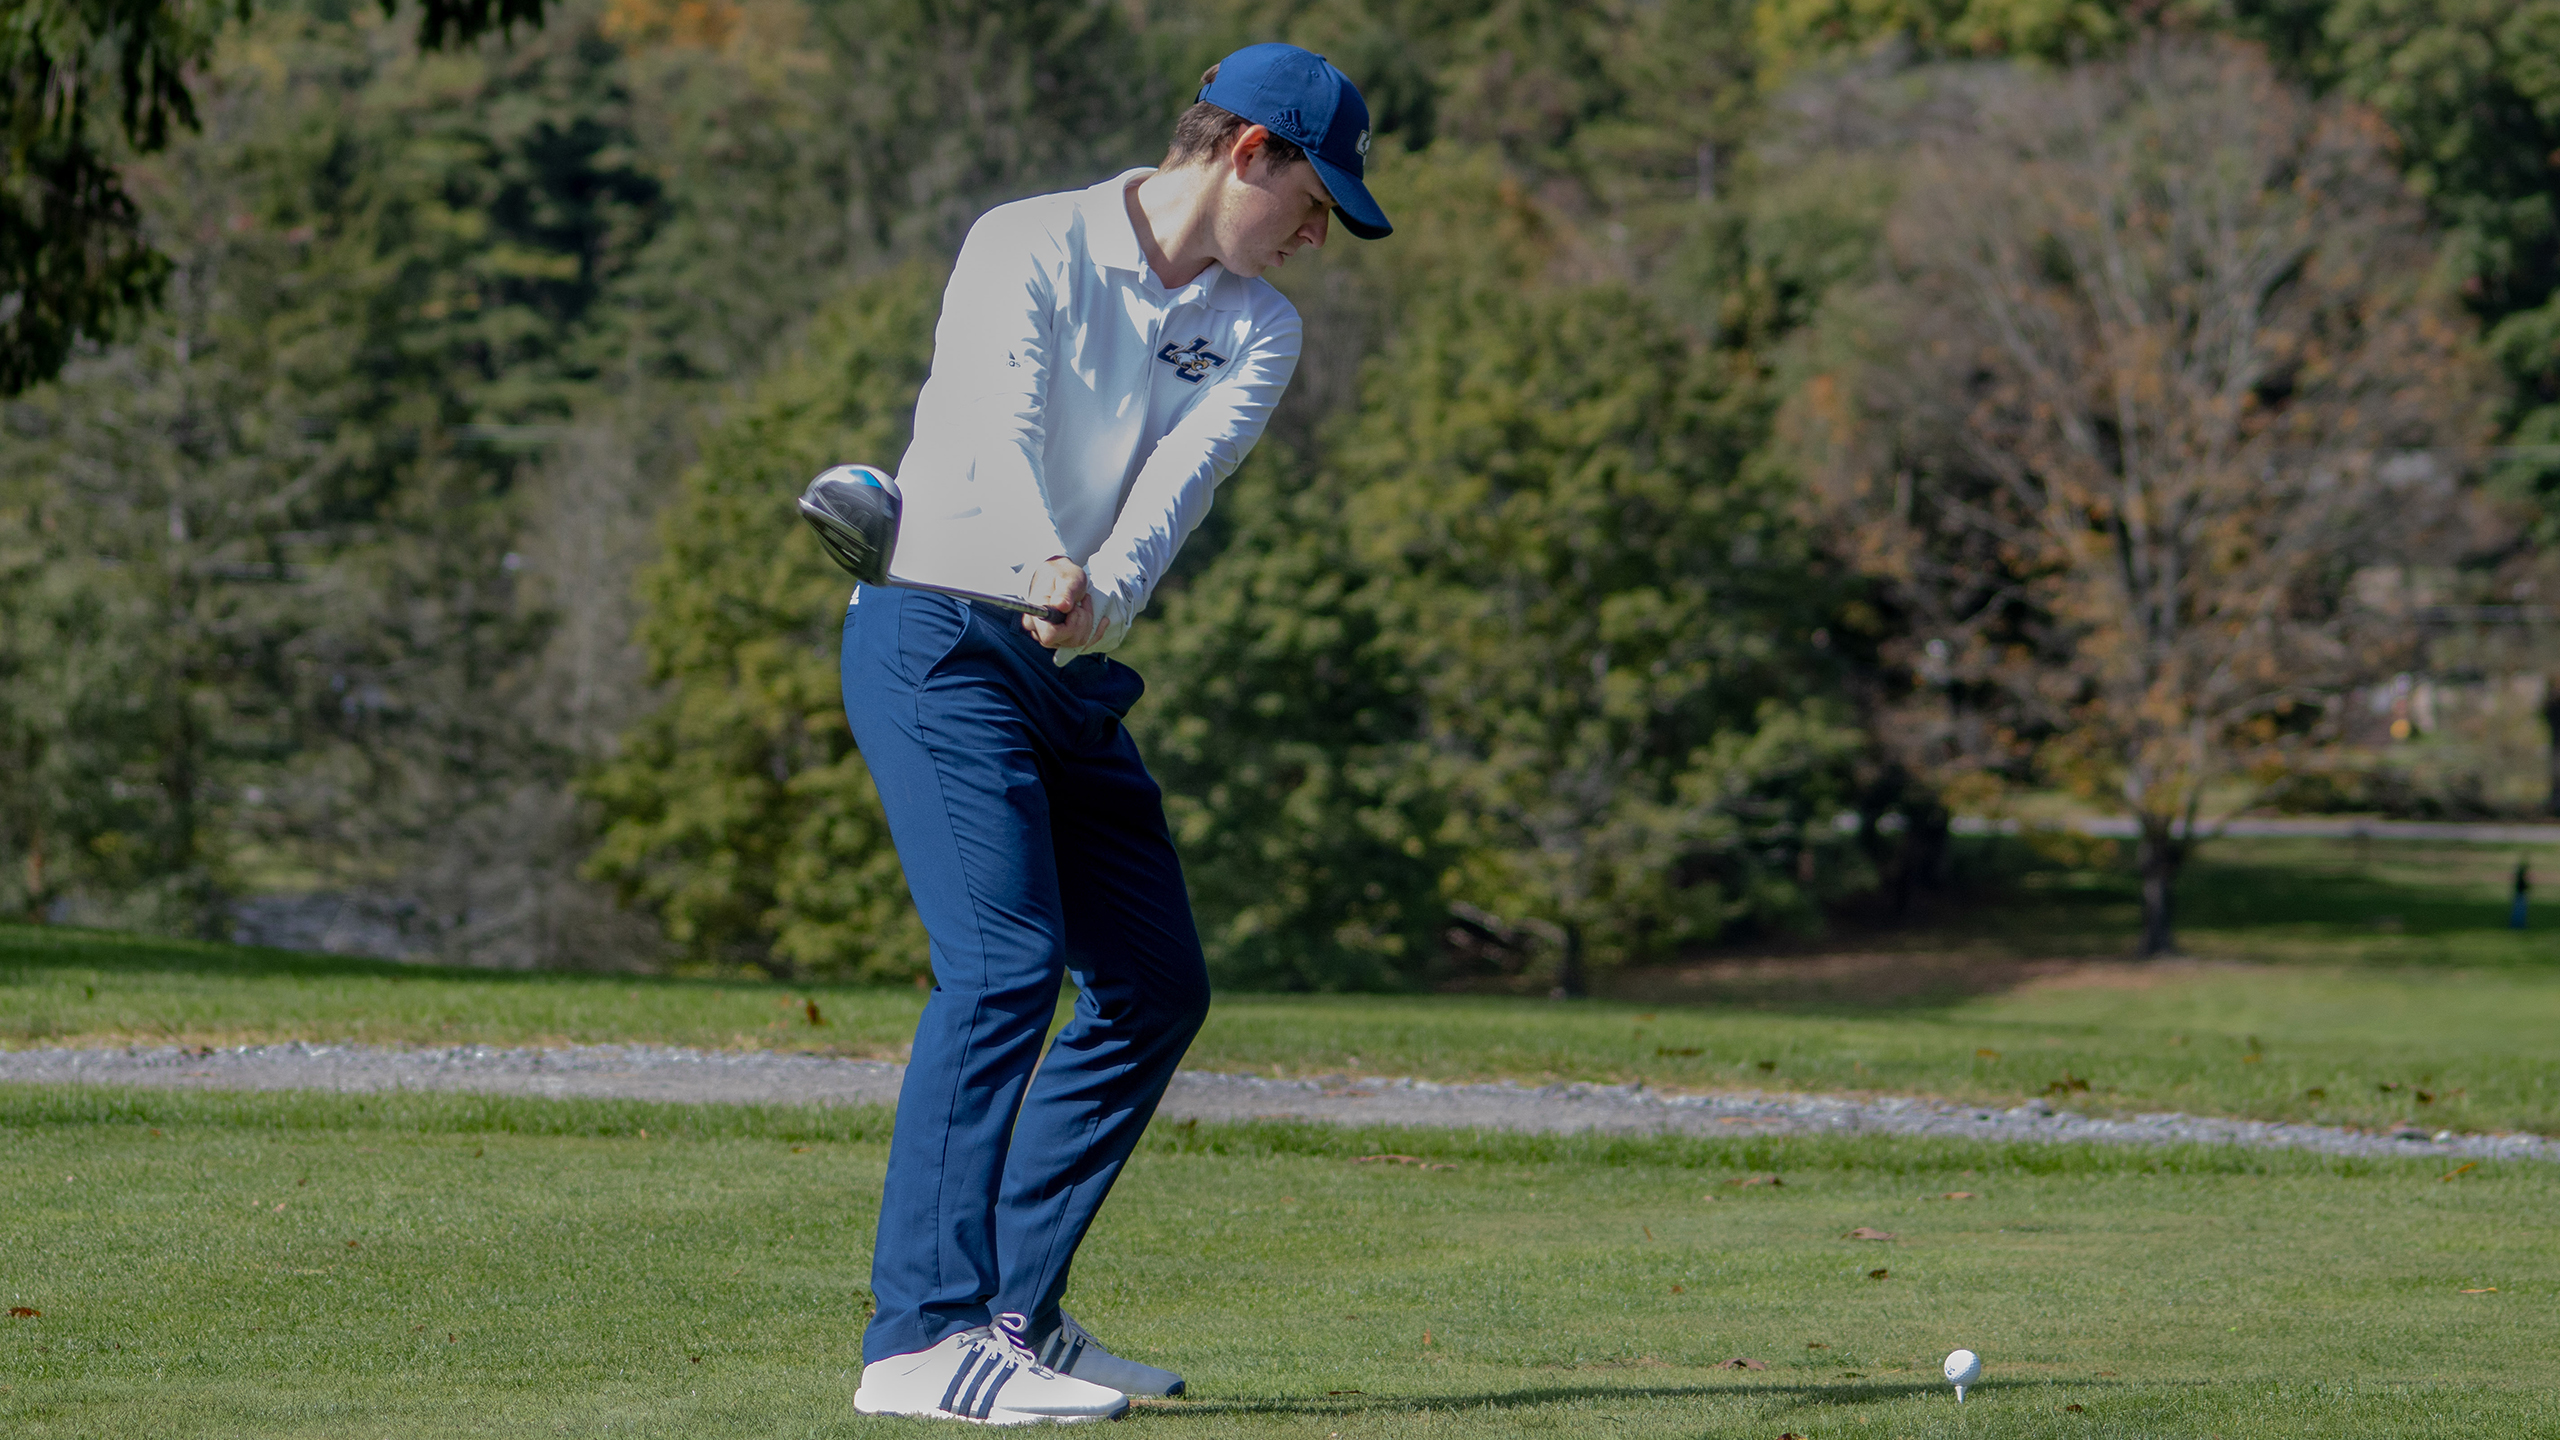 Juniata Men&rsquo;s Golf Finishes in 8th at the Northeast Shootout